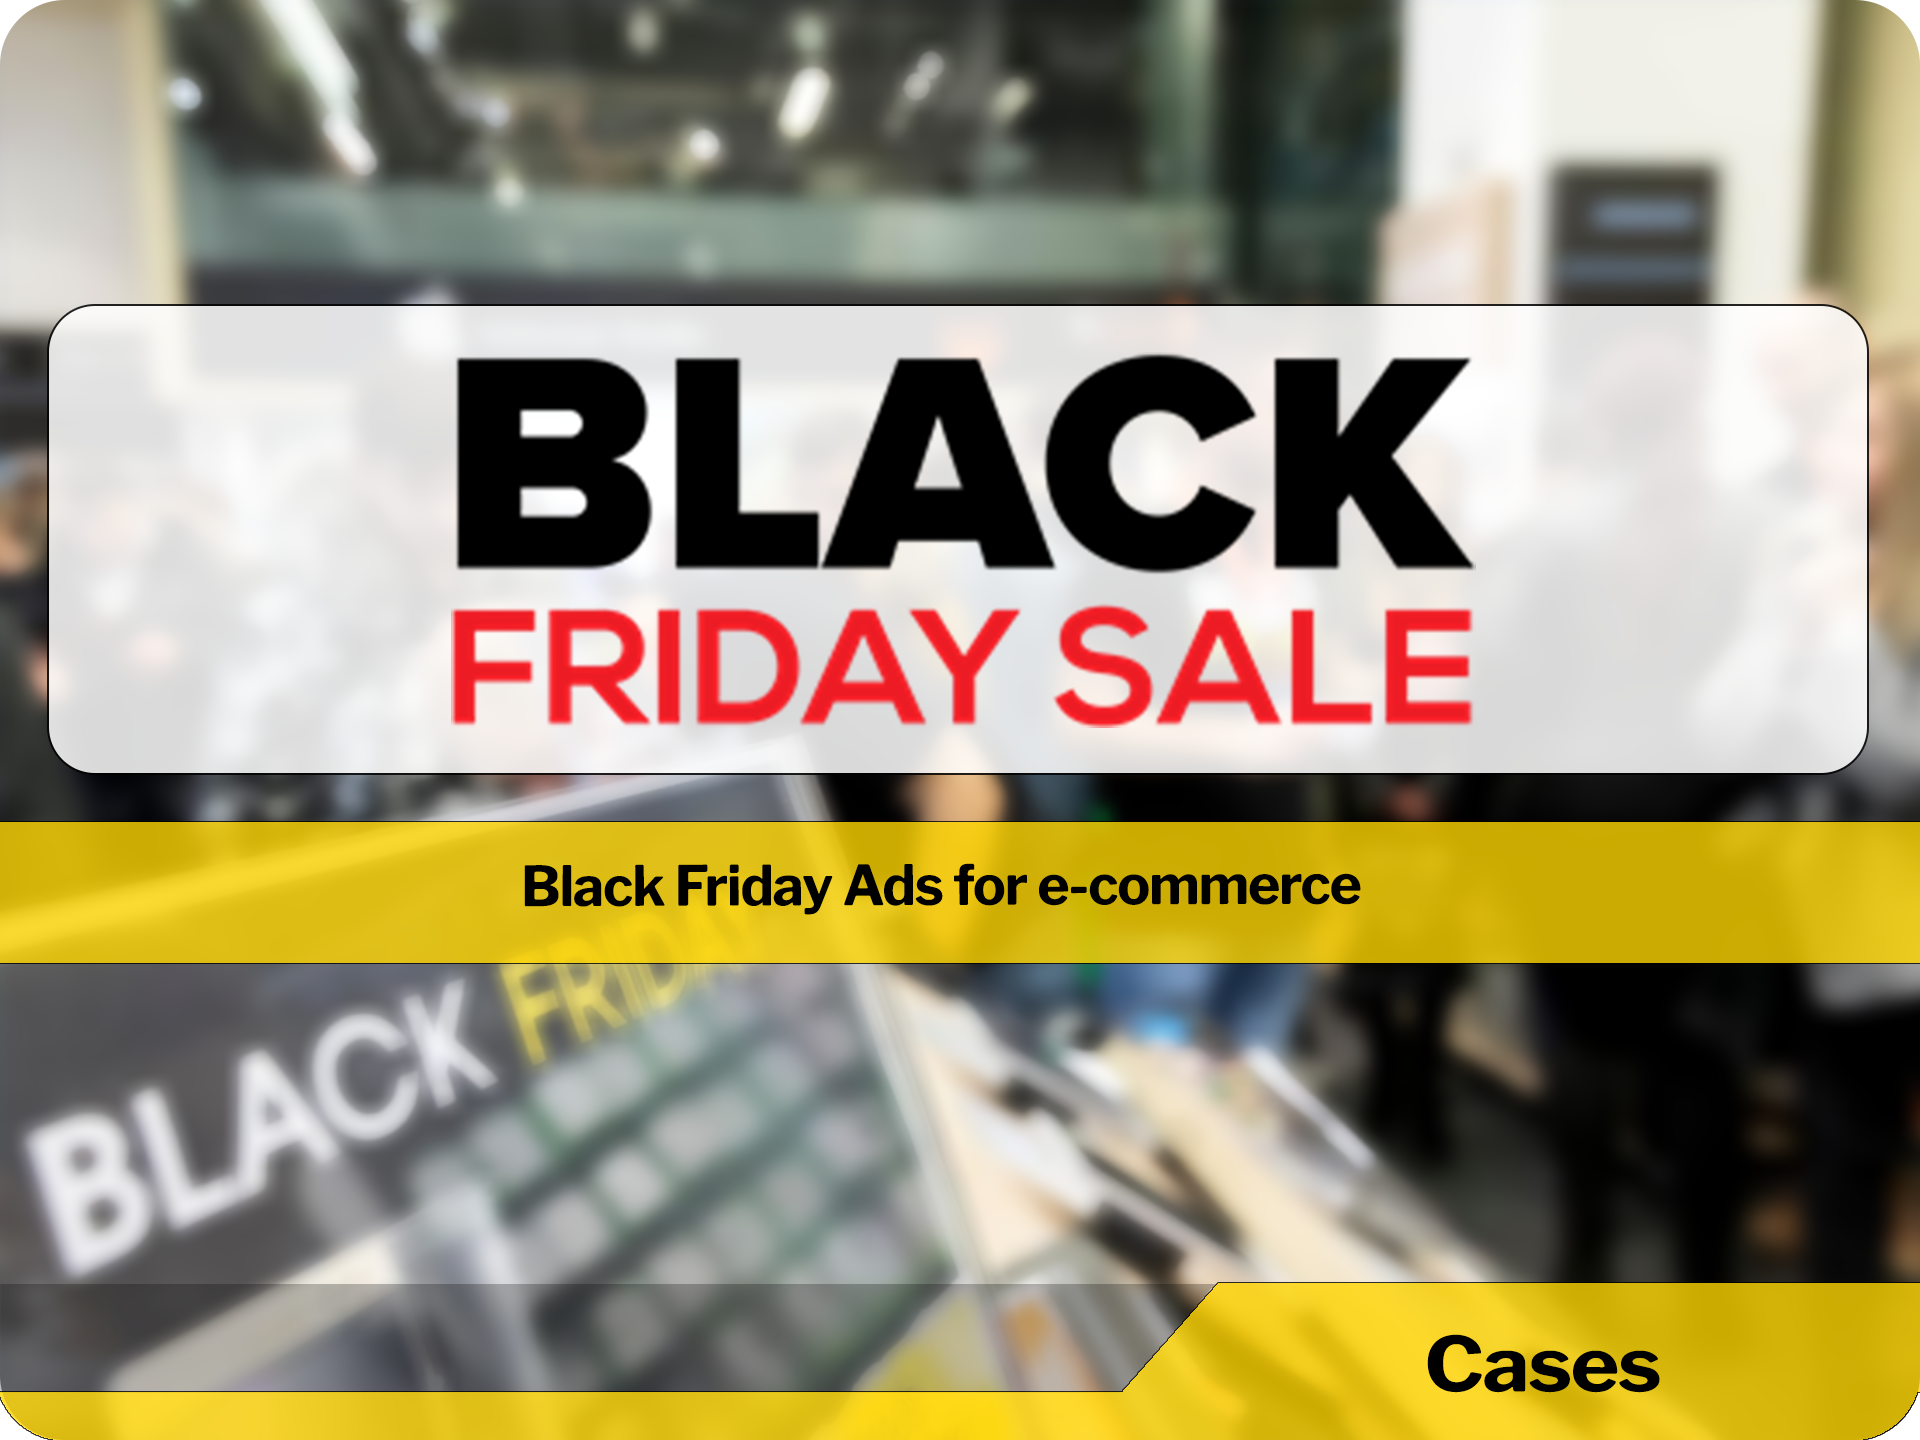 What are the results of ad during the Black Friday for e-commerce?